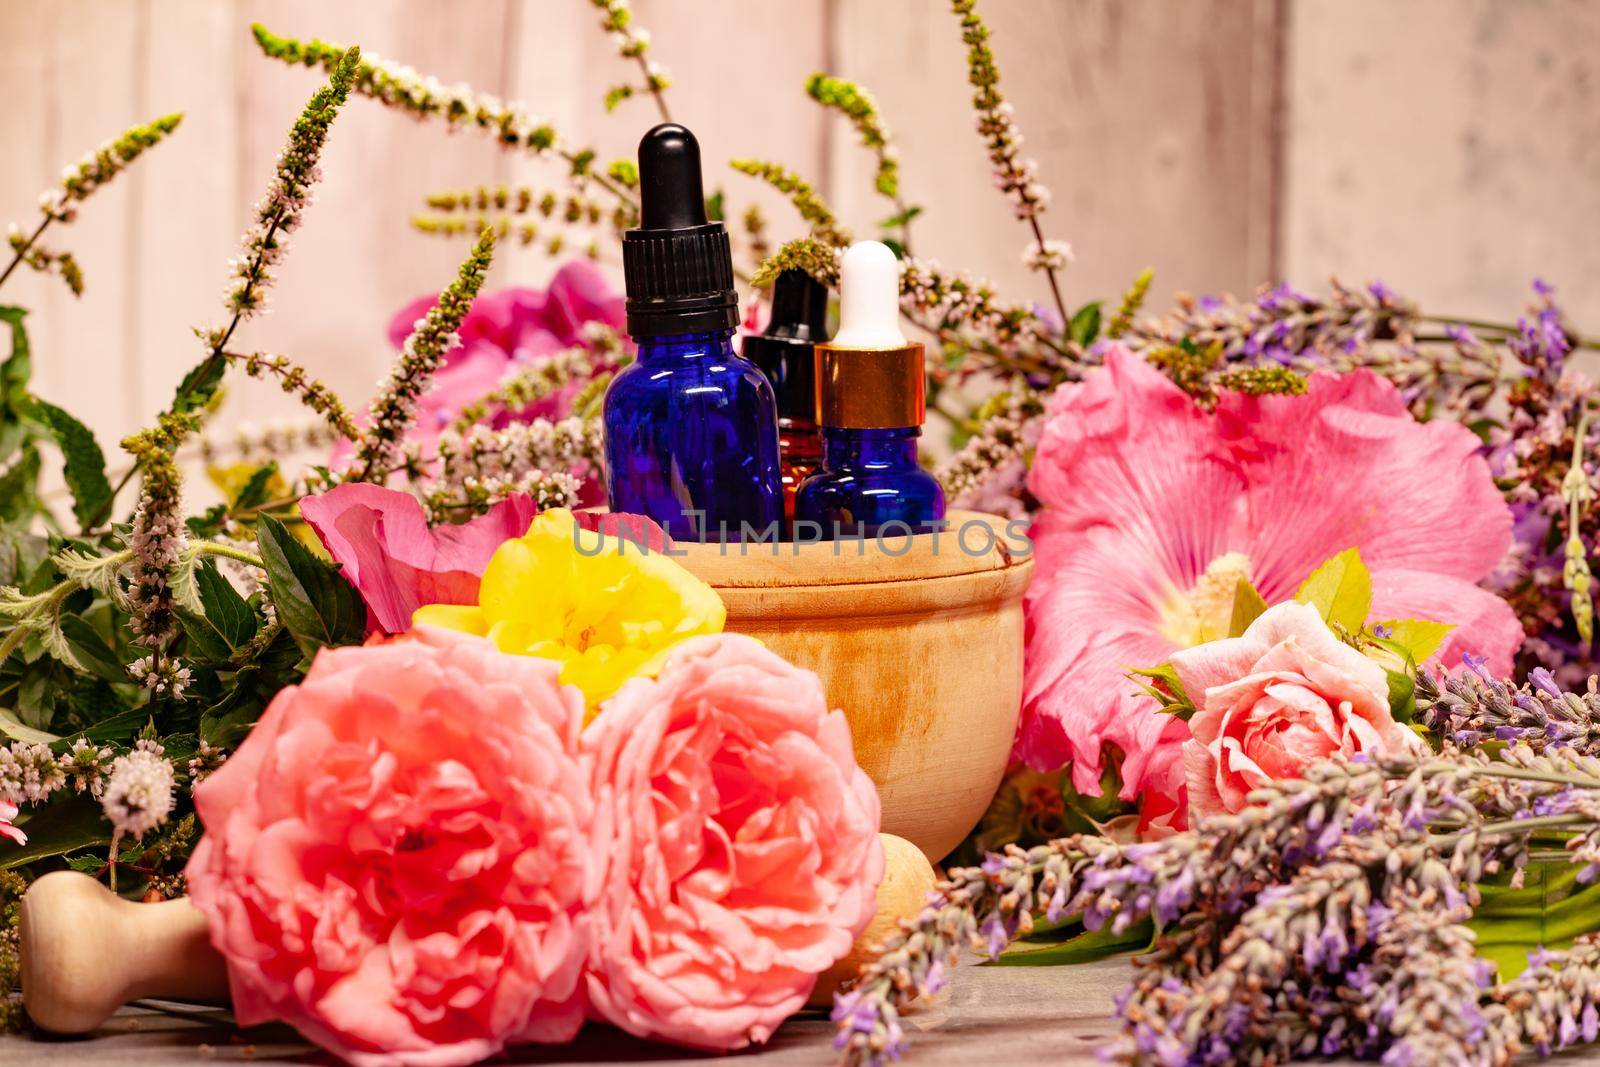 flowers and bottles of essential oils for aromatherapy